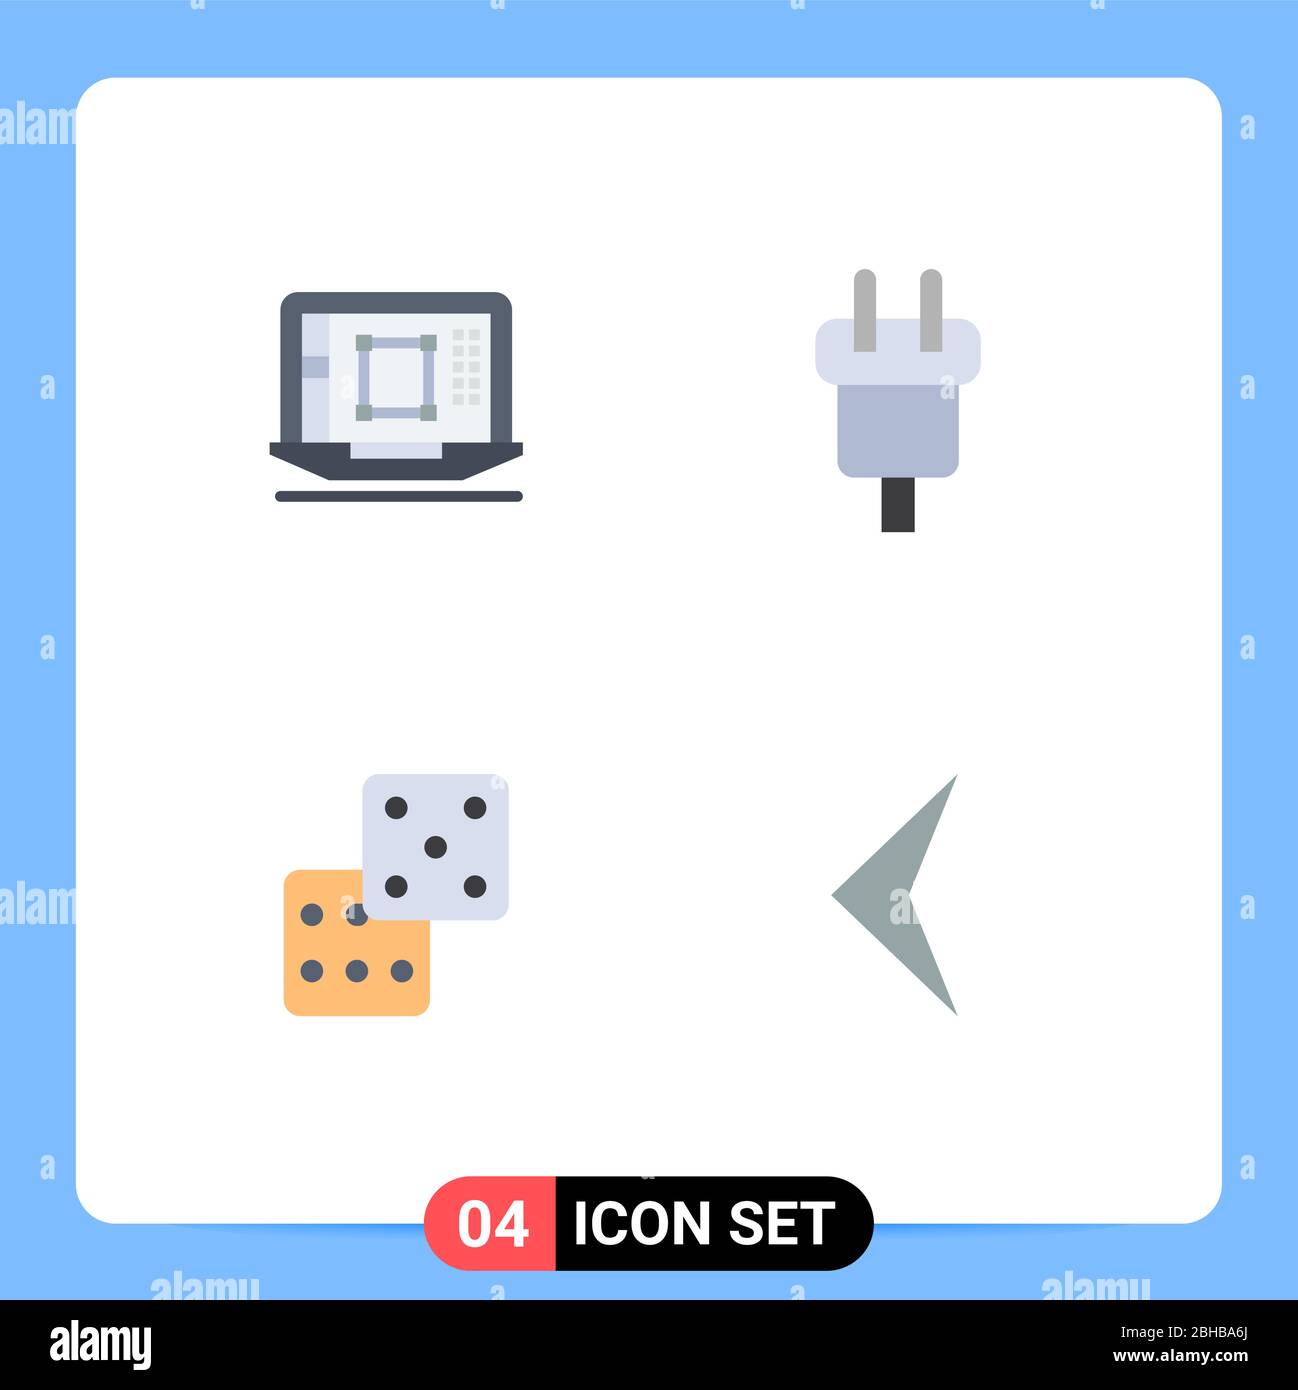 Pack of 4 creative Flat Icons of laptop, power, enhance, connector, dice Editable Vector Design Elements Stock Vector